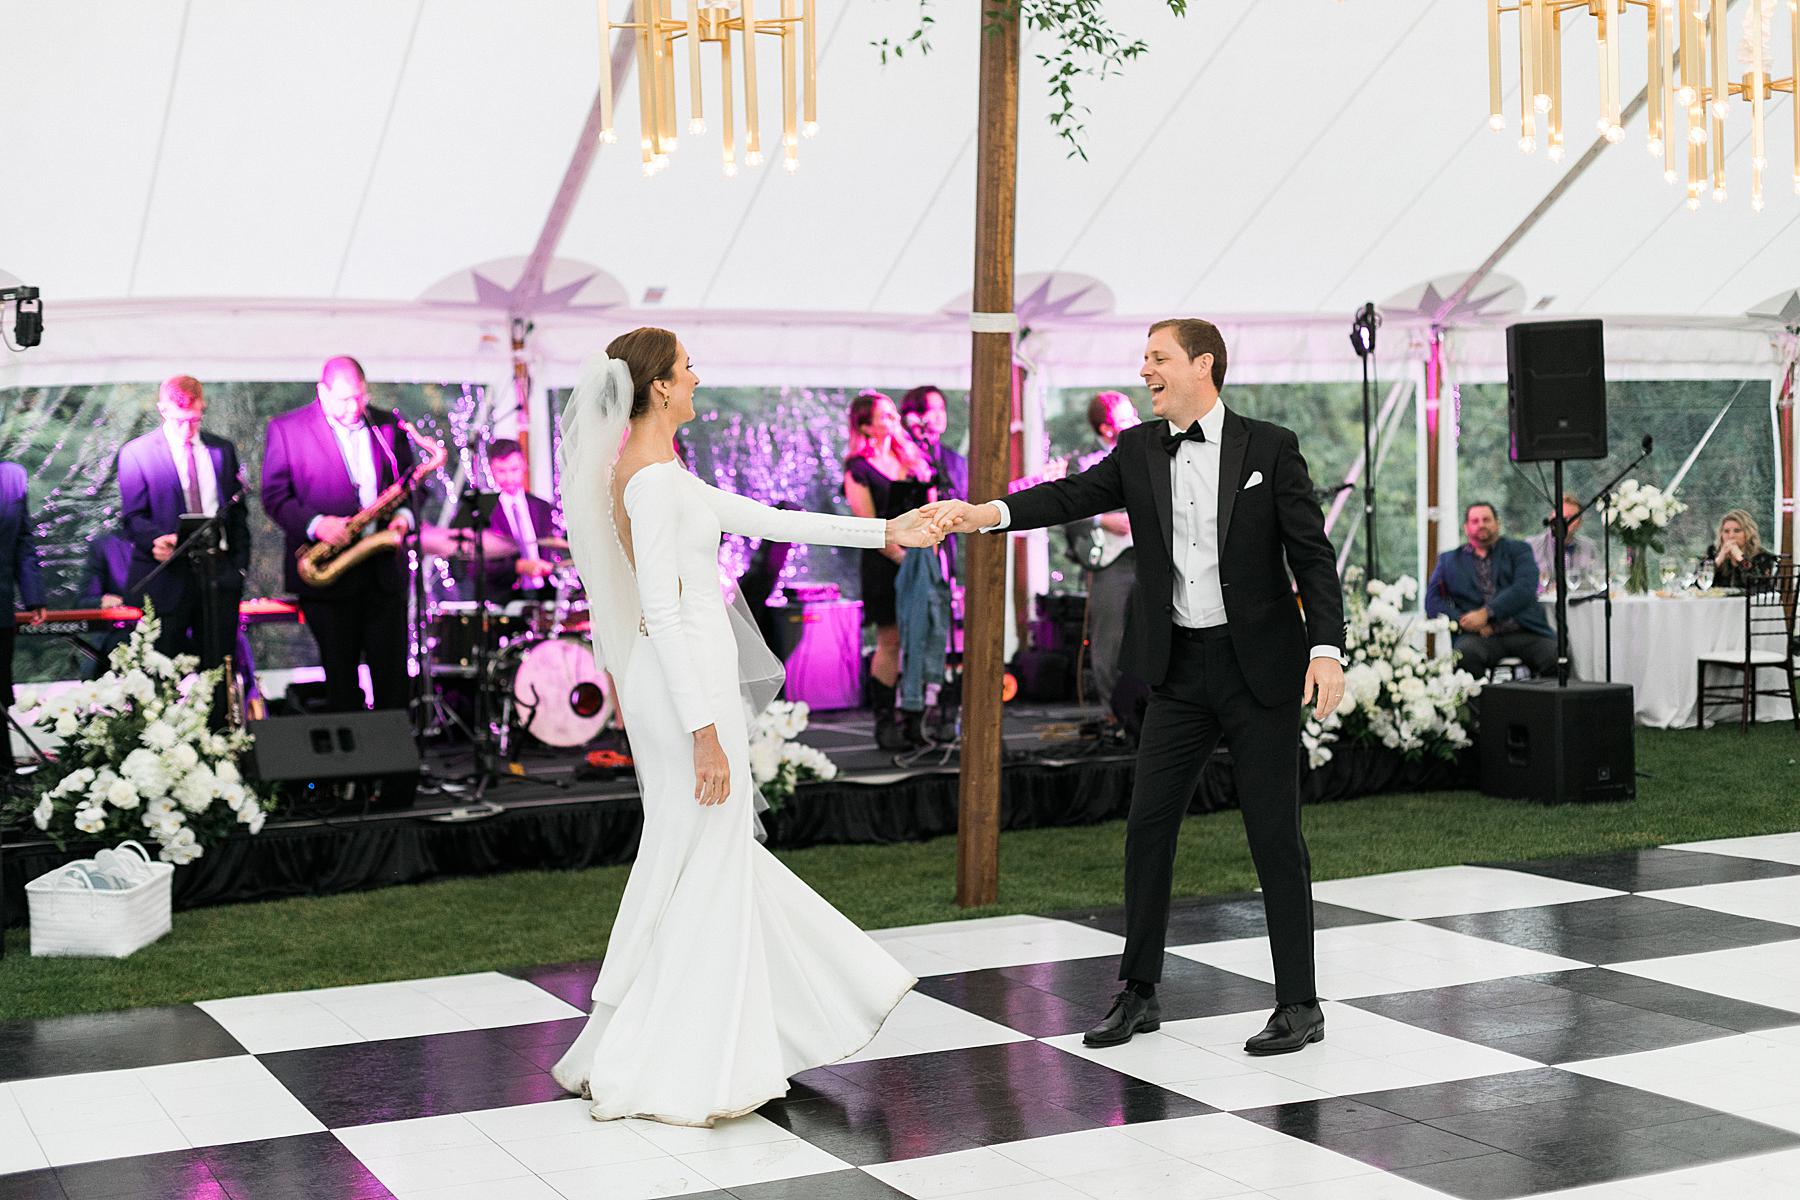 newlyweds first dance on checkerboard dance floor under a sailcloth tent wedding reception with live band, at horseshoe bay beach club in door county